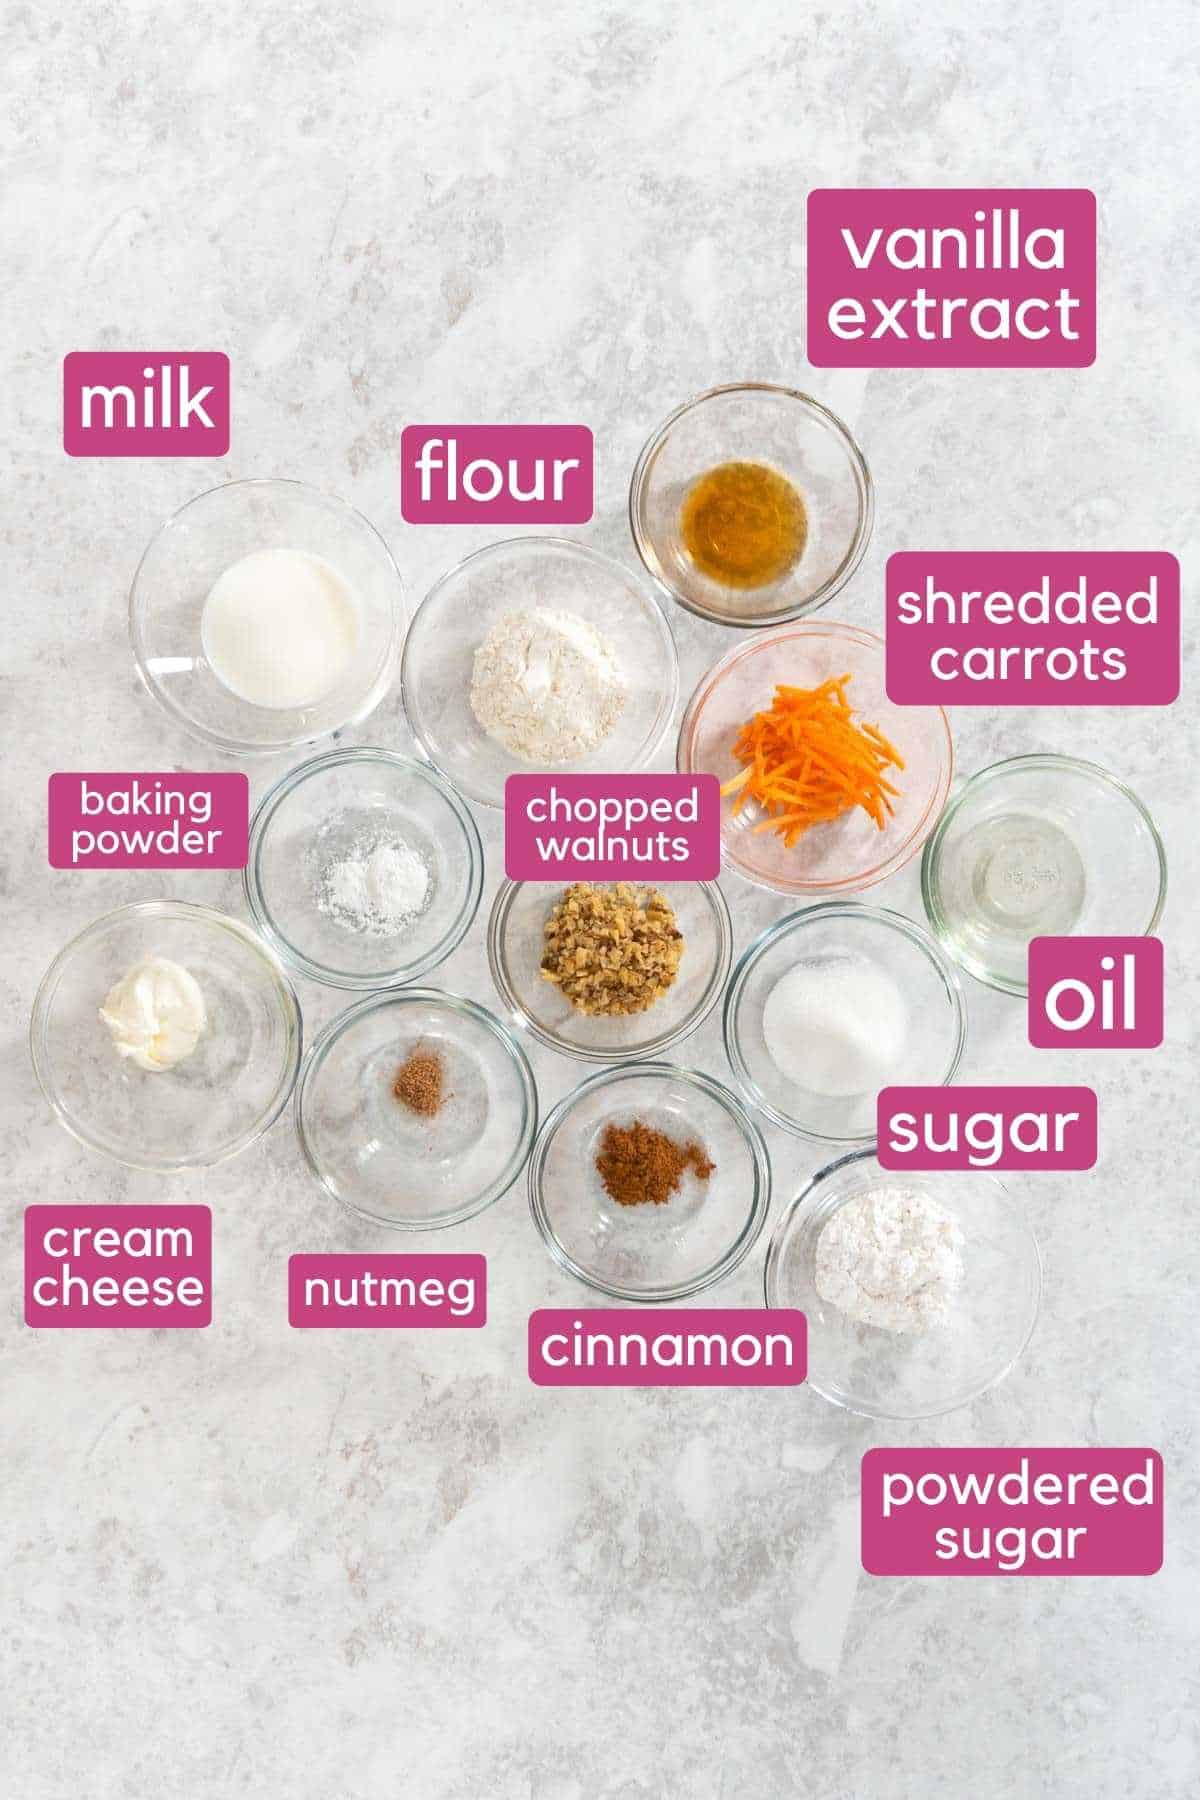 An overhead view of ingredients needed to make a single serve carrot cake. Includes flour, shredded carrot, walnuts, and oil.